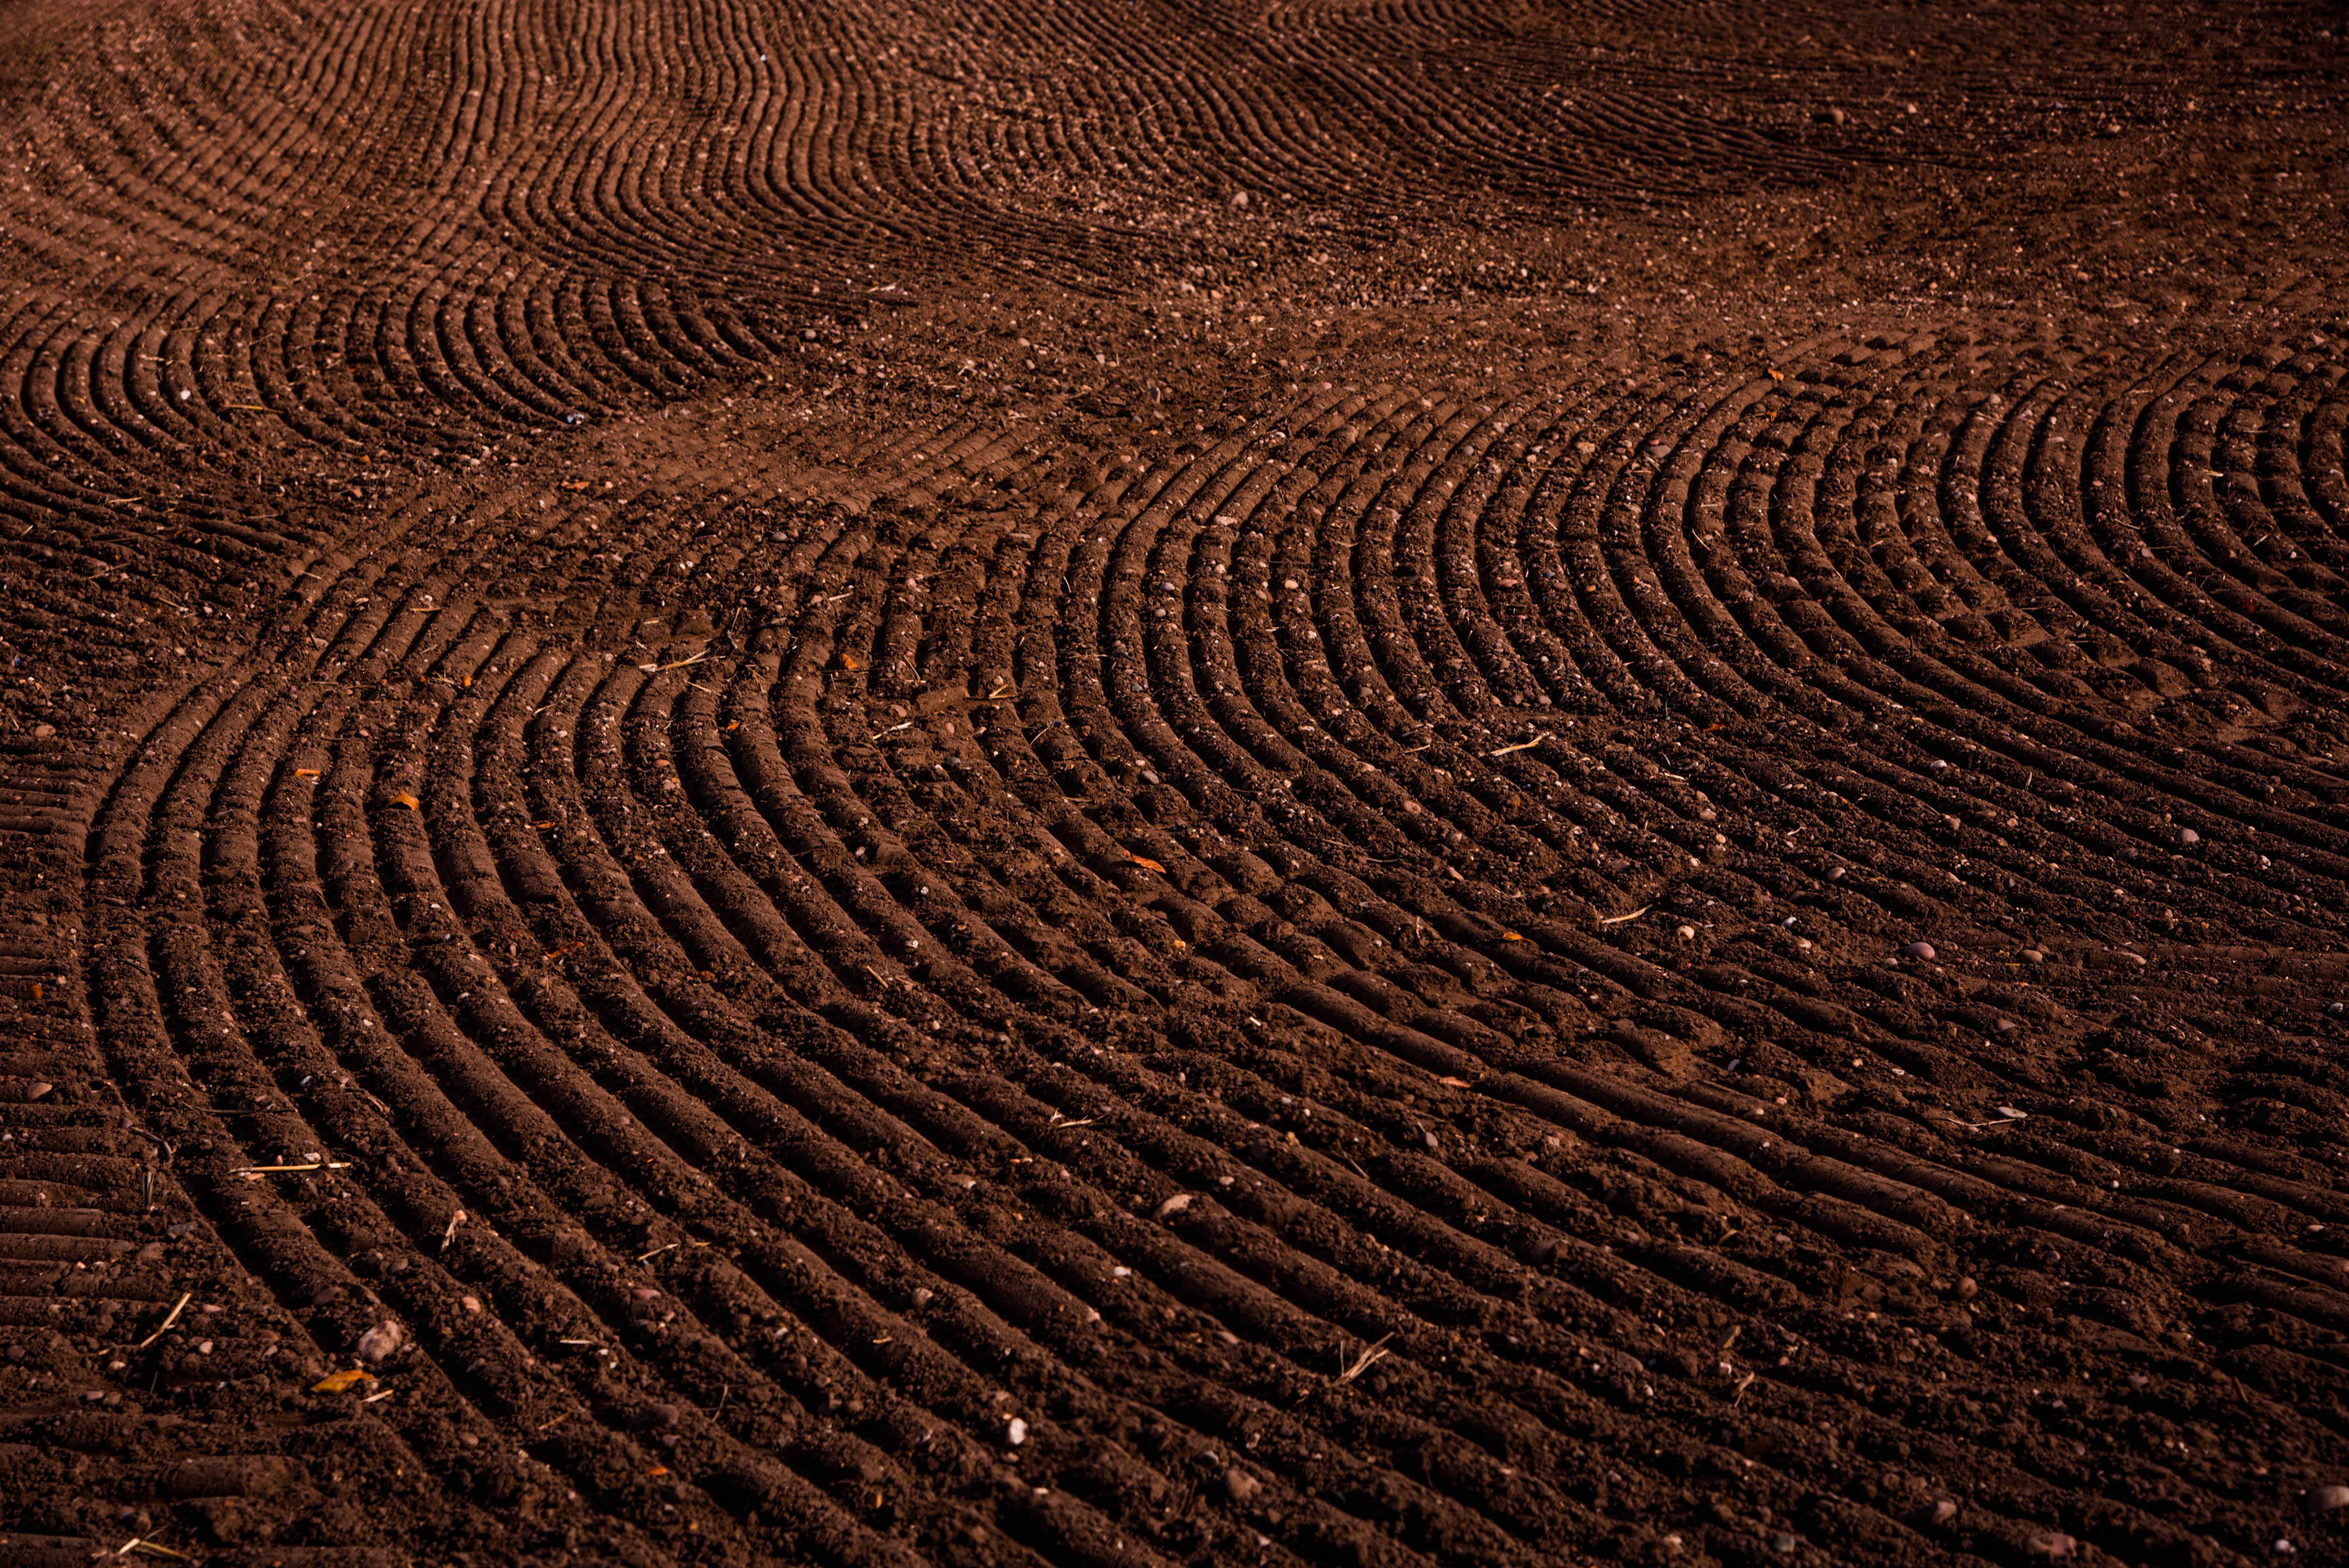 Rich soil on an agricultural field